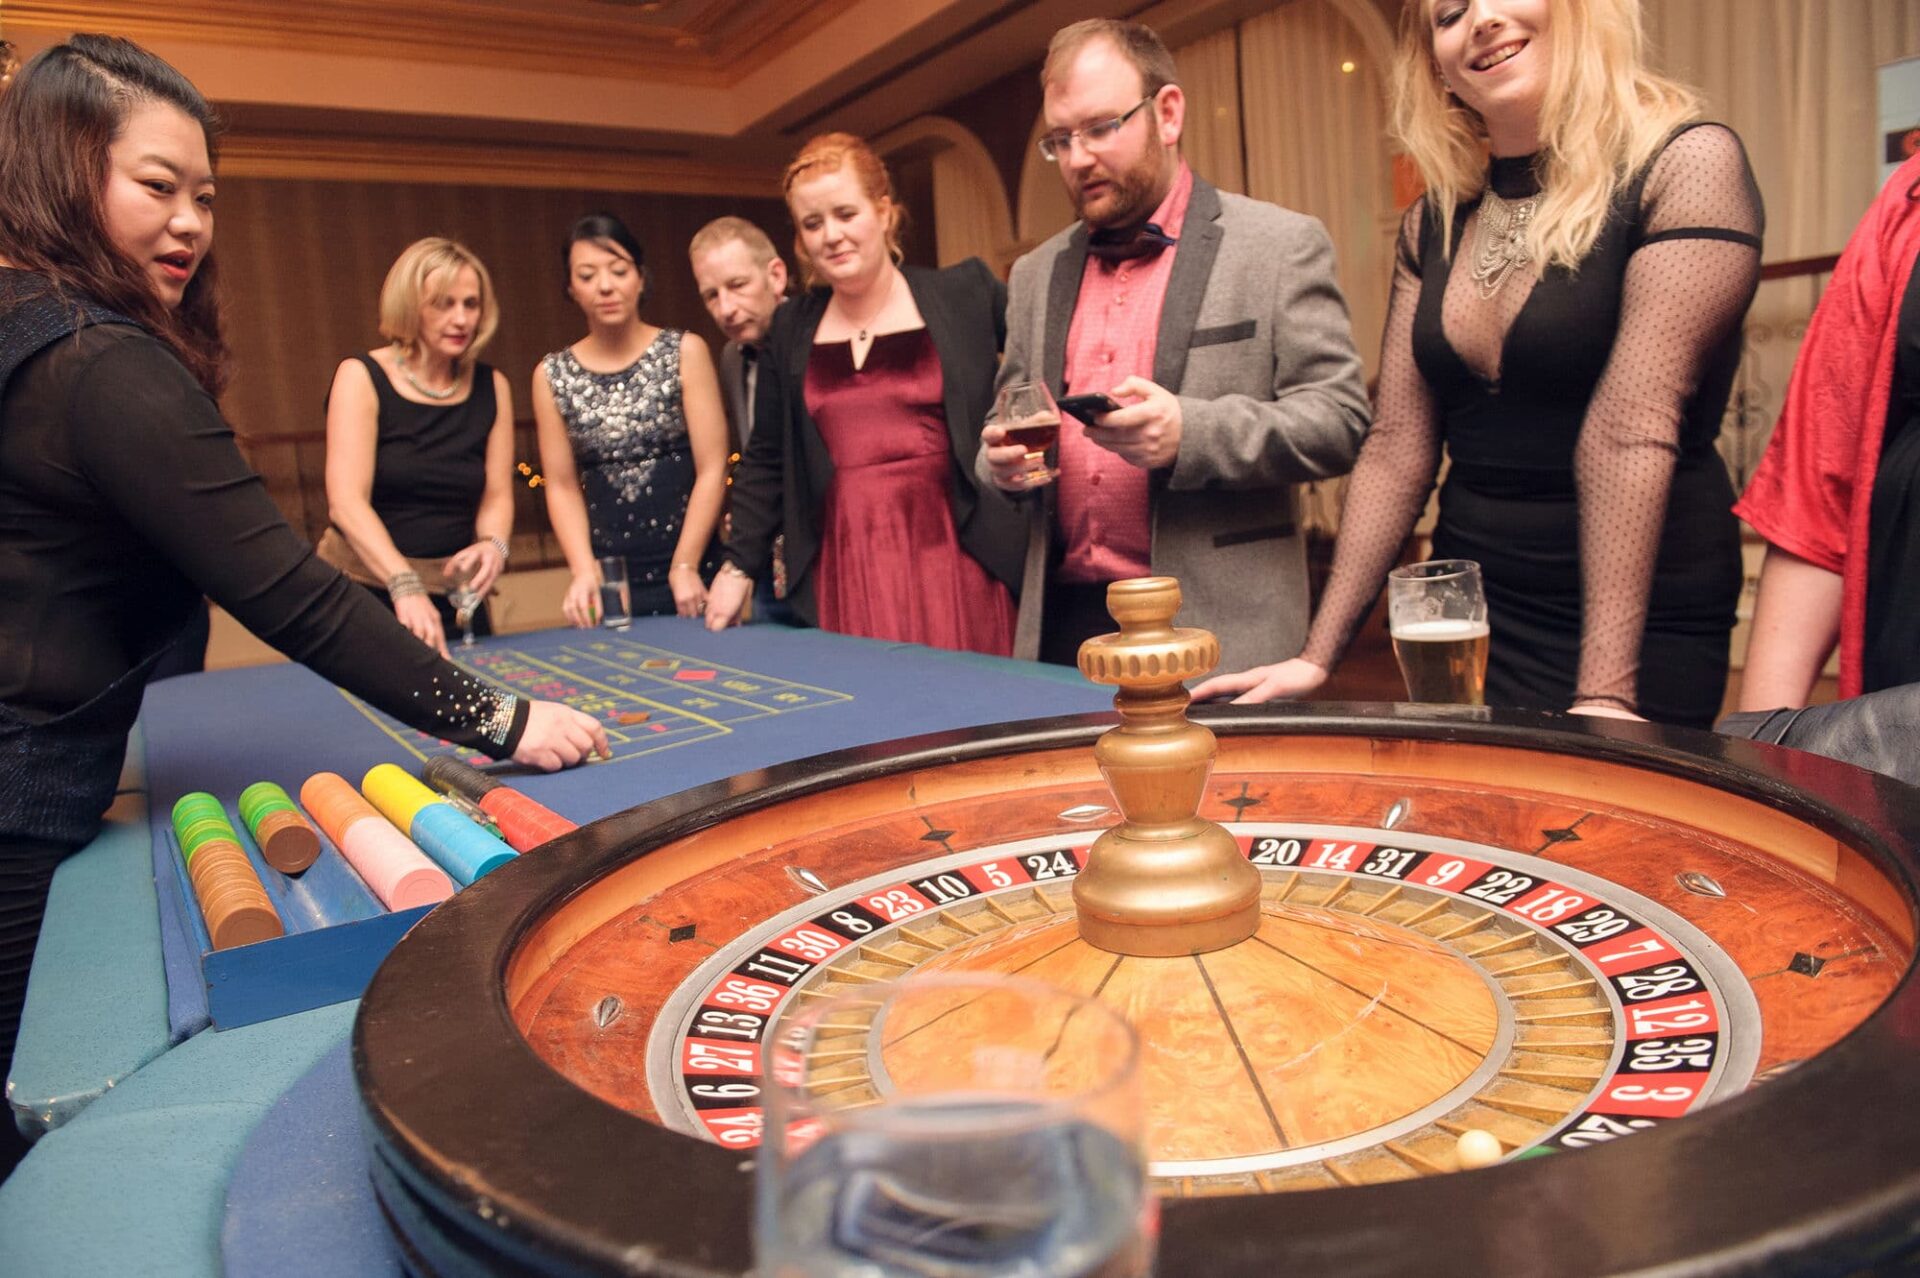 gambling at the roulette tables at a fun casino night themed event